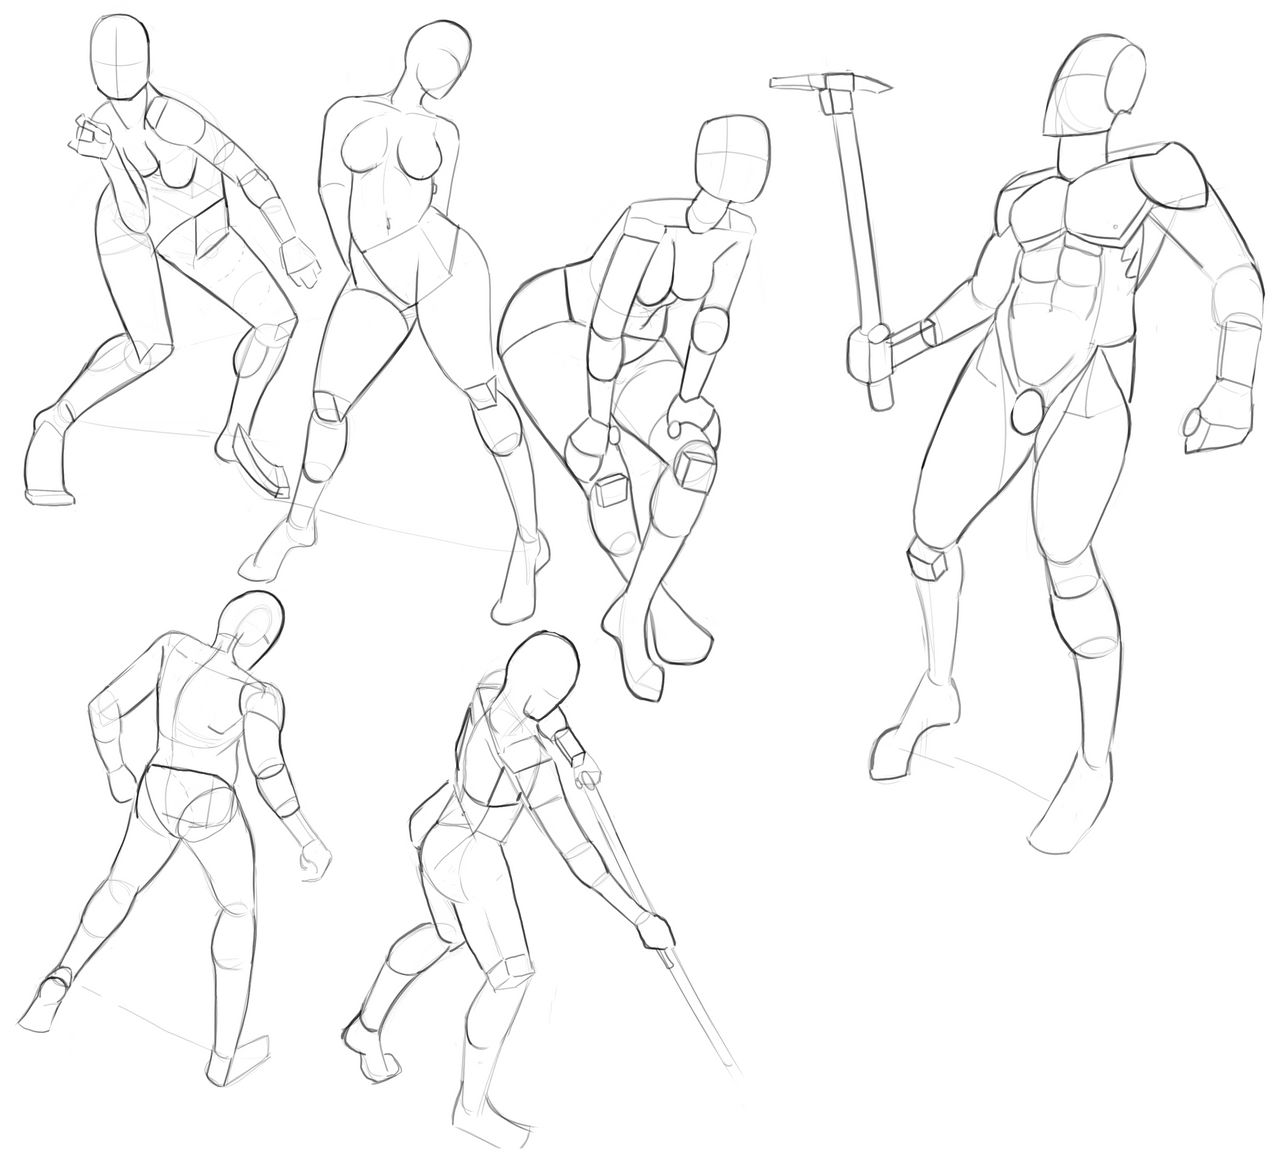 Daily Drawing - Mannequin Studies 9 by Quackie101 on DeviantArt